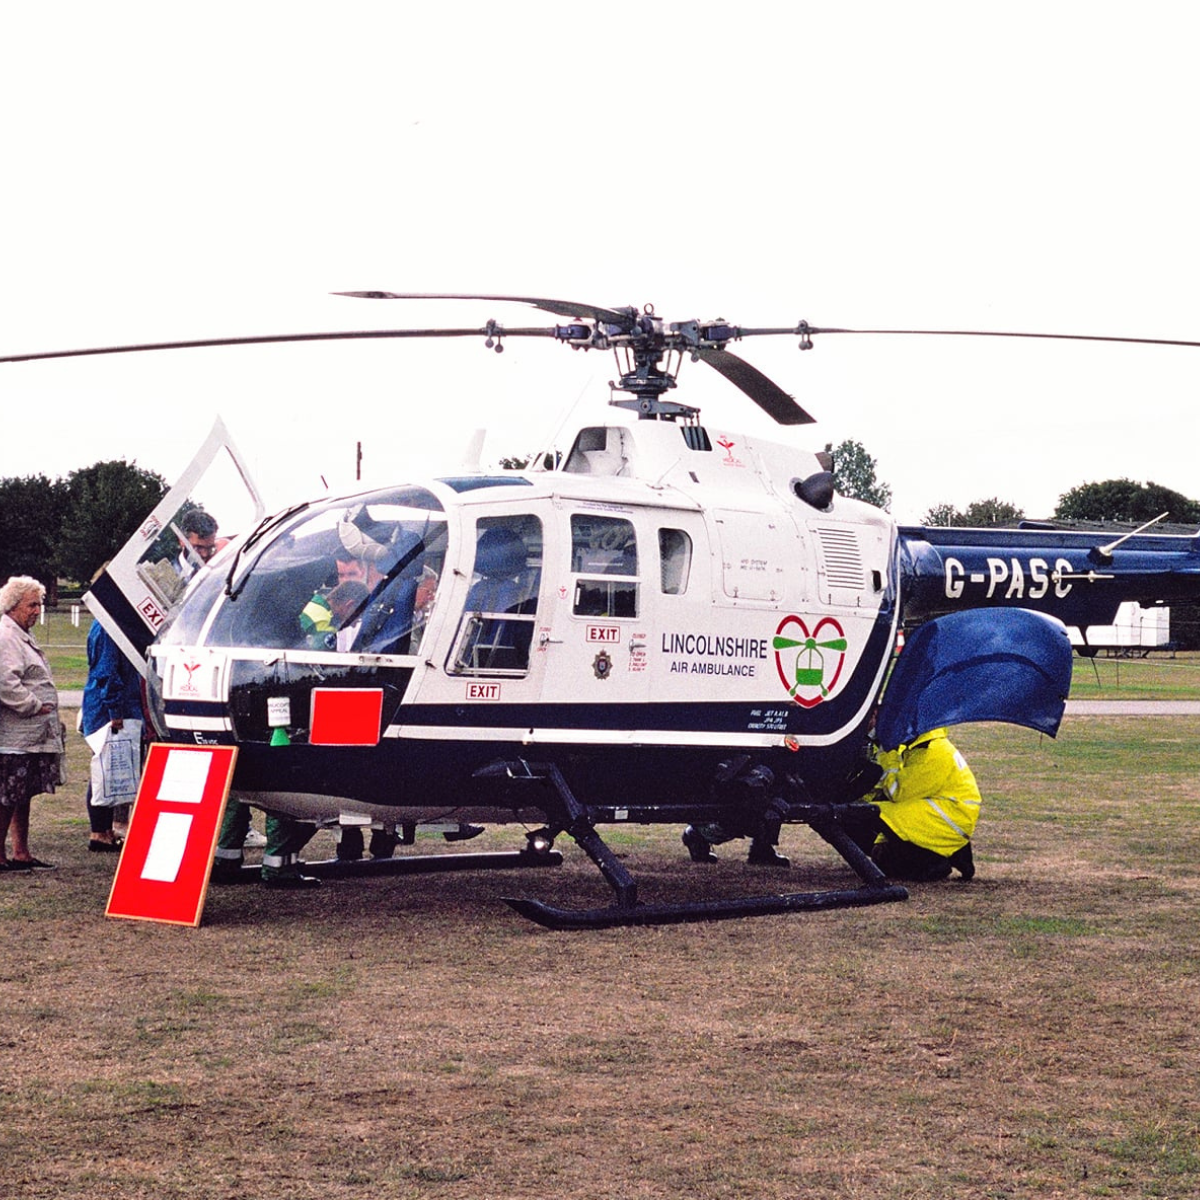 Our history archive showing original G-PASC helicopter